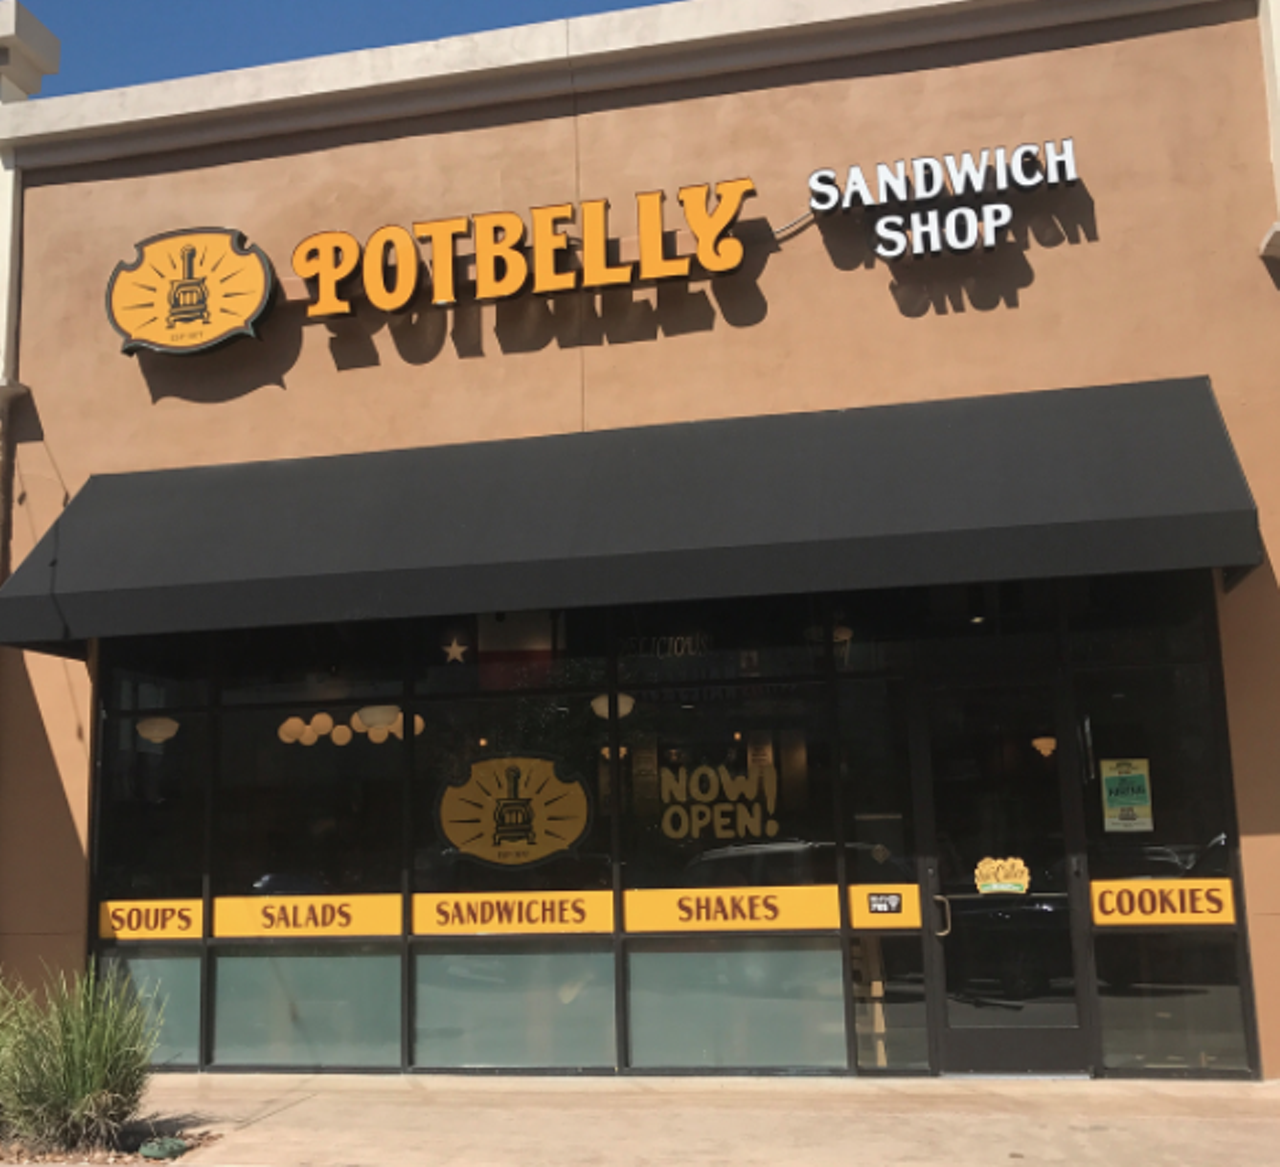 Potbelly Sandwich Shop
Multiple locations, potbelly.com
Potbelly is expanding in San Antonio, and we're not complaining. With fresh subs, soups salads and more, live music is just an extra reason to dine at this chain.
Photo via Instagram, sachartermoms